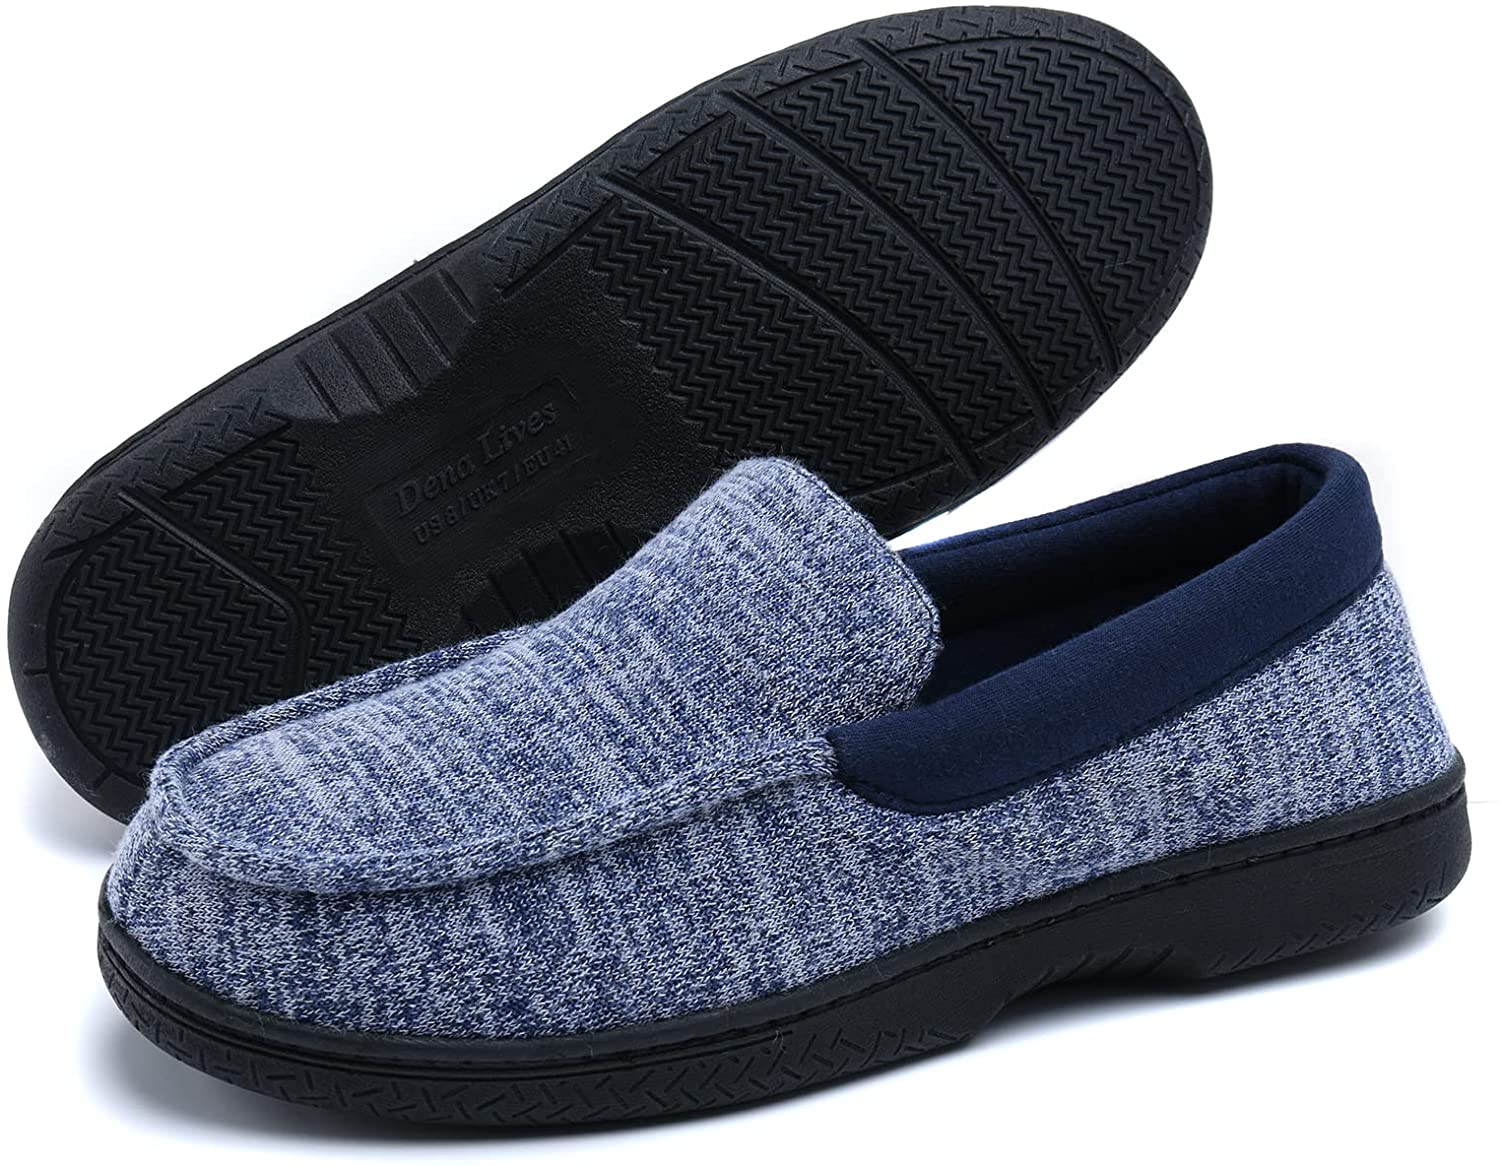 LongBay Men's Cozy Moccasin Slippers Loafer House Shoes with Memory Foam and Rubber Sole for Indoor Outdoor 